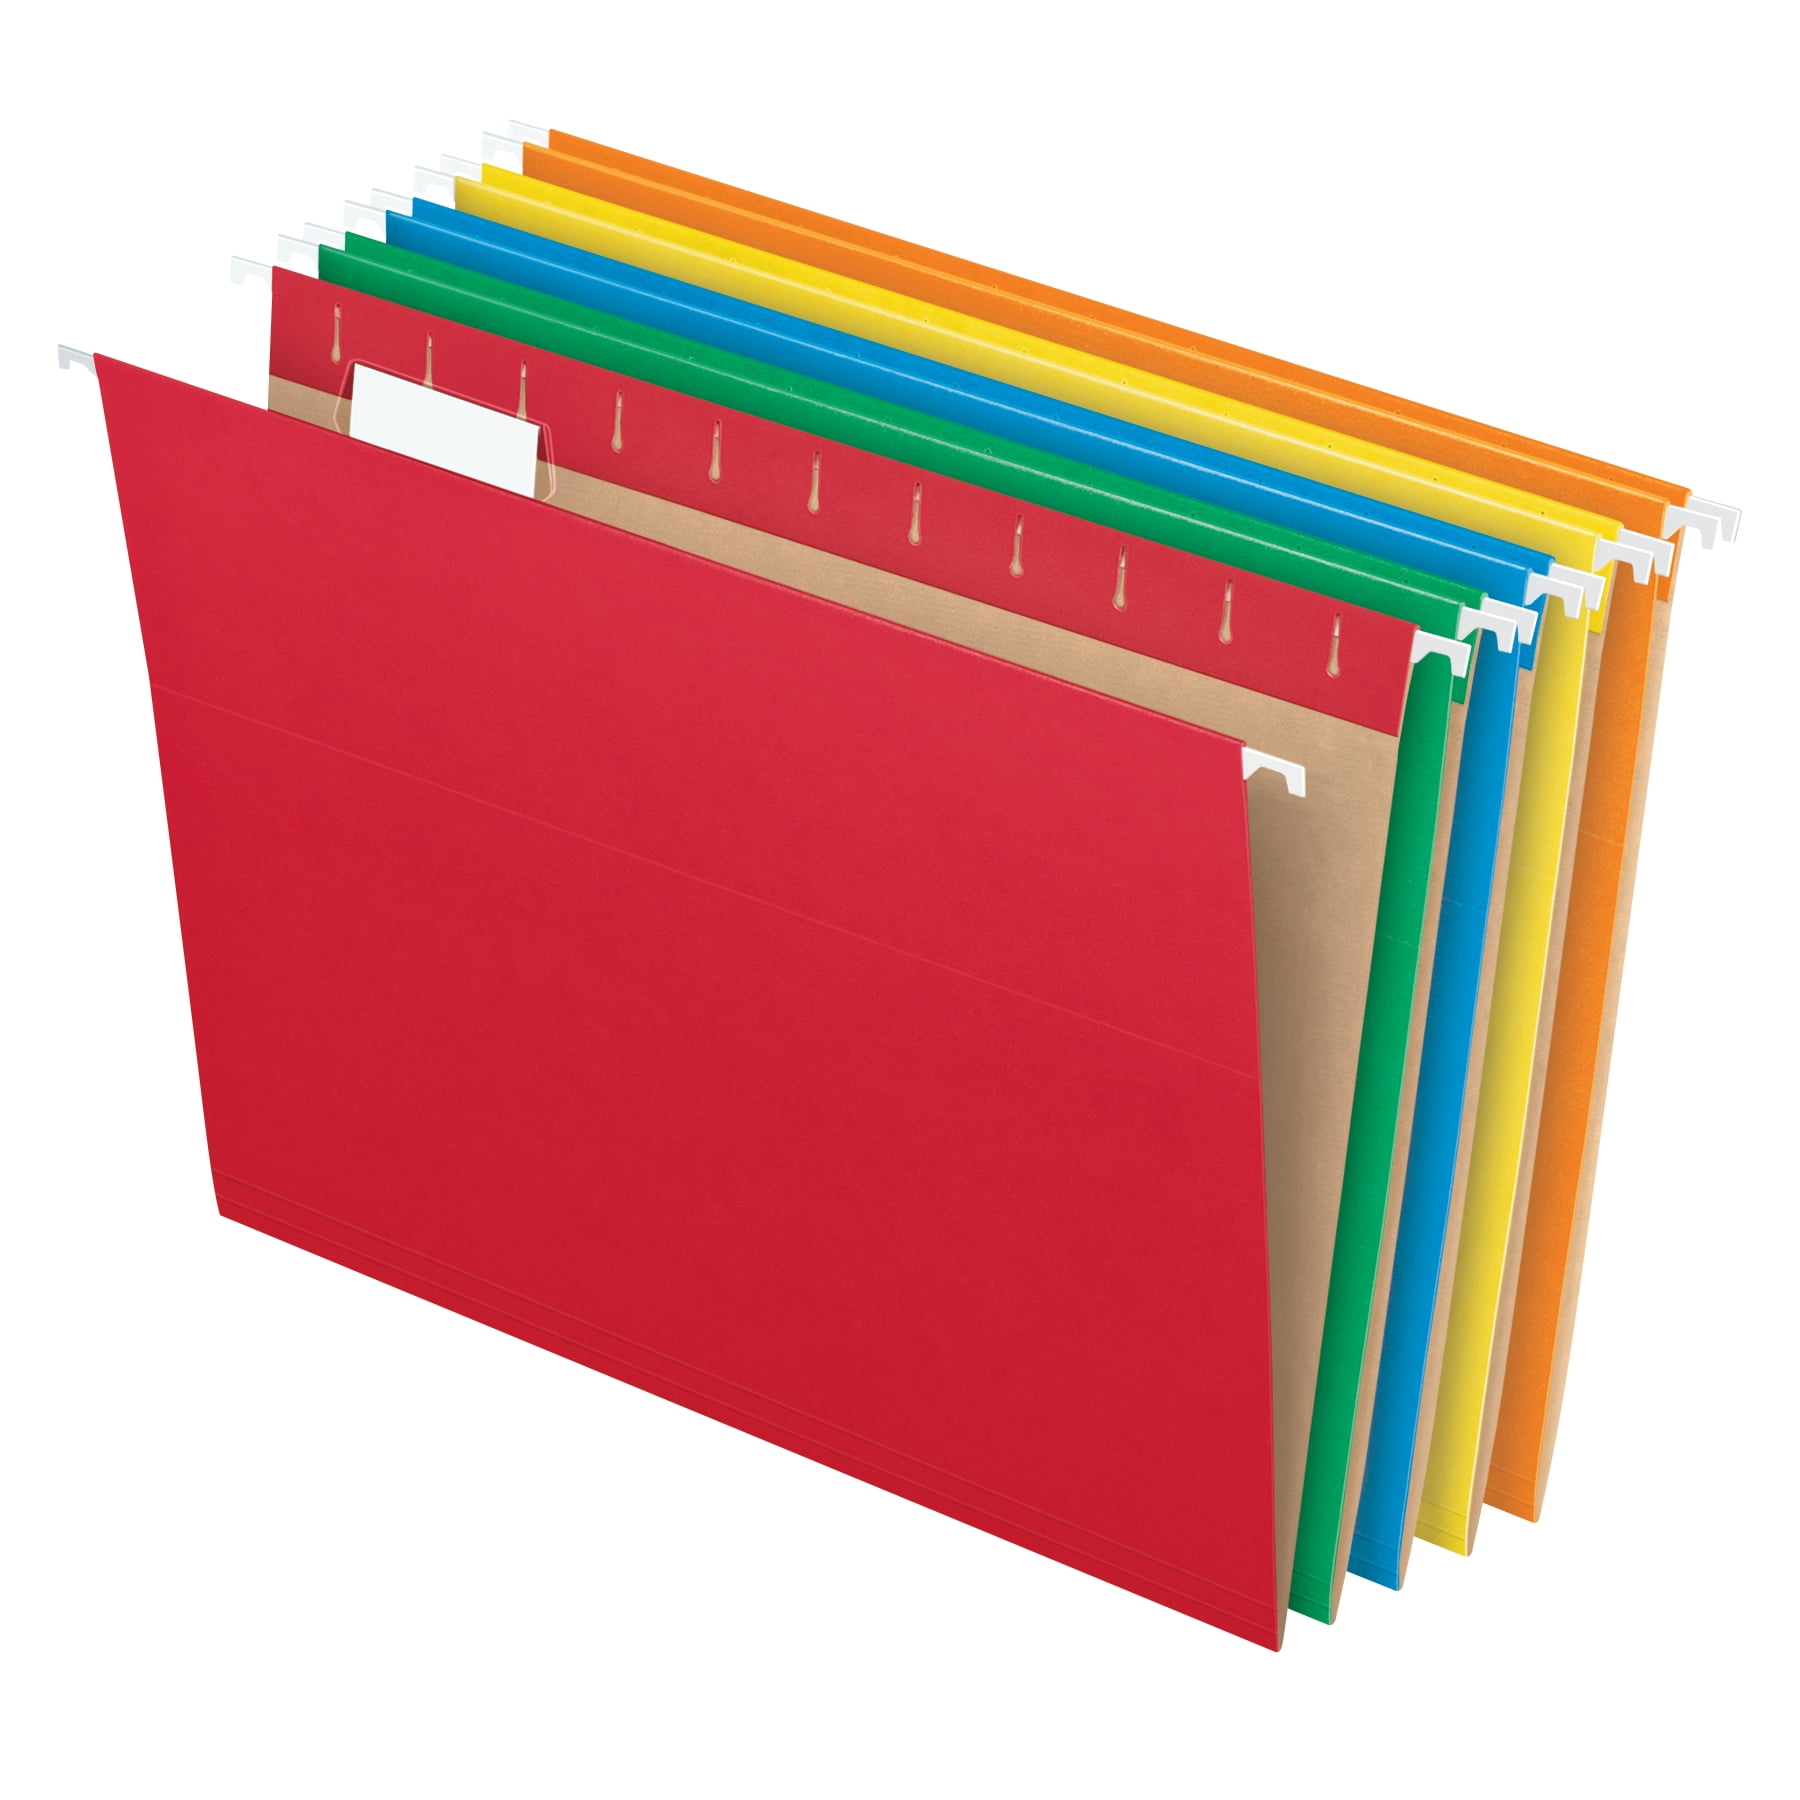 TRU RED Hanging File Folders 5-Tab Letter Size Assorted Jewel Tone Colors 